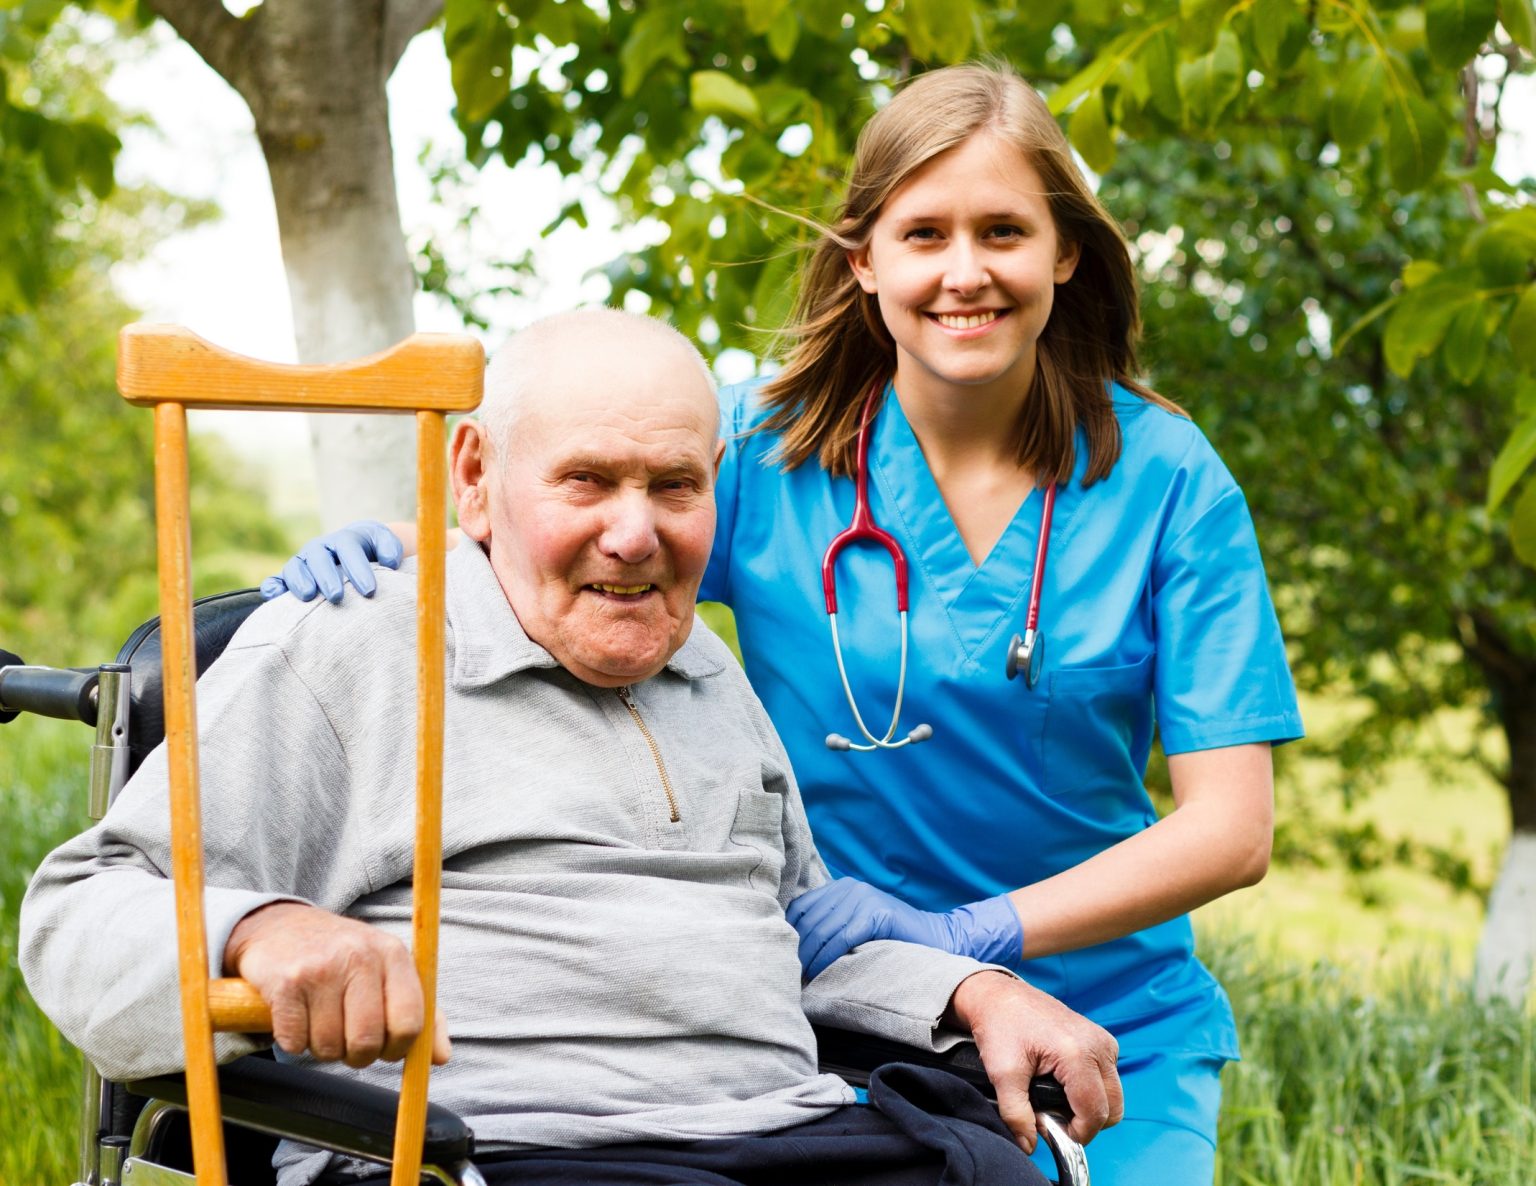 Important Reasons for Outdoor Experiences at Utah County Senior Living